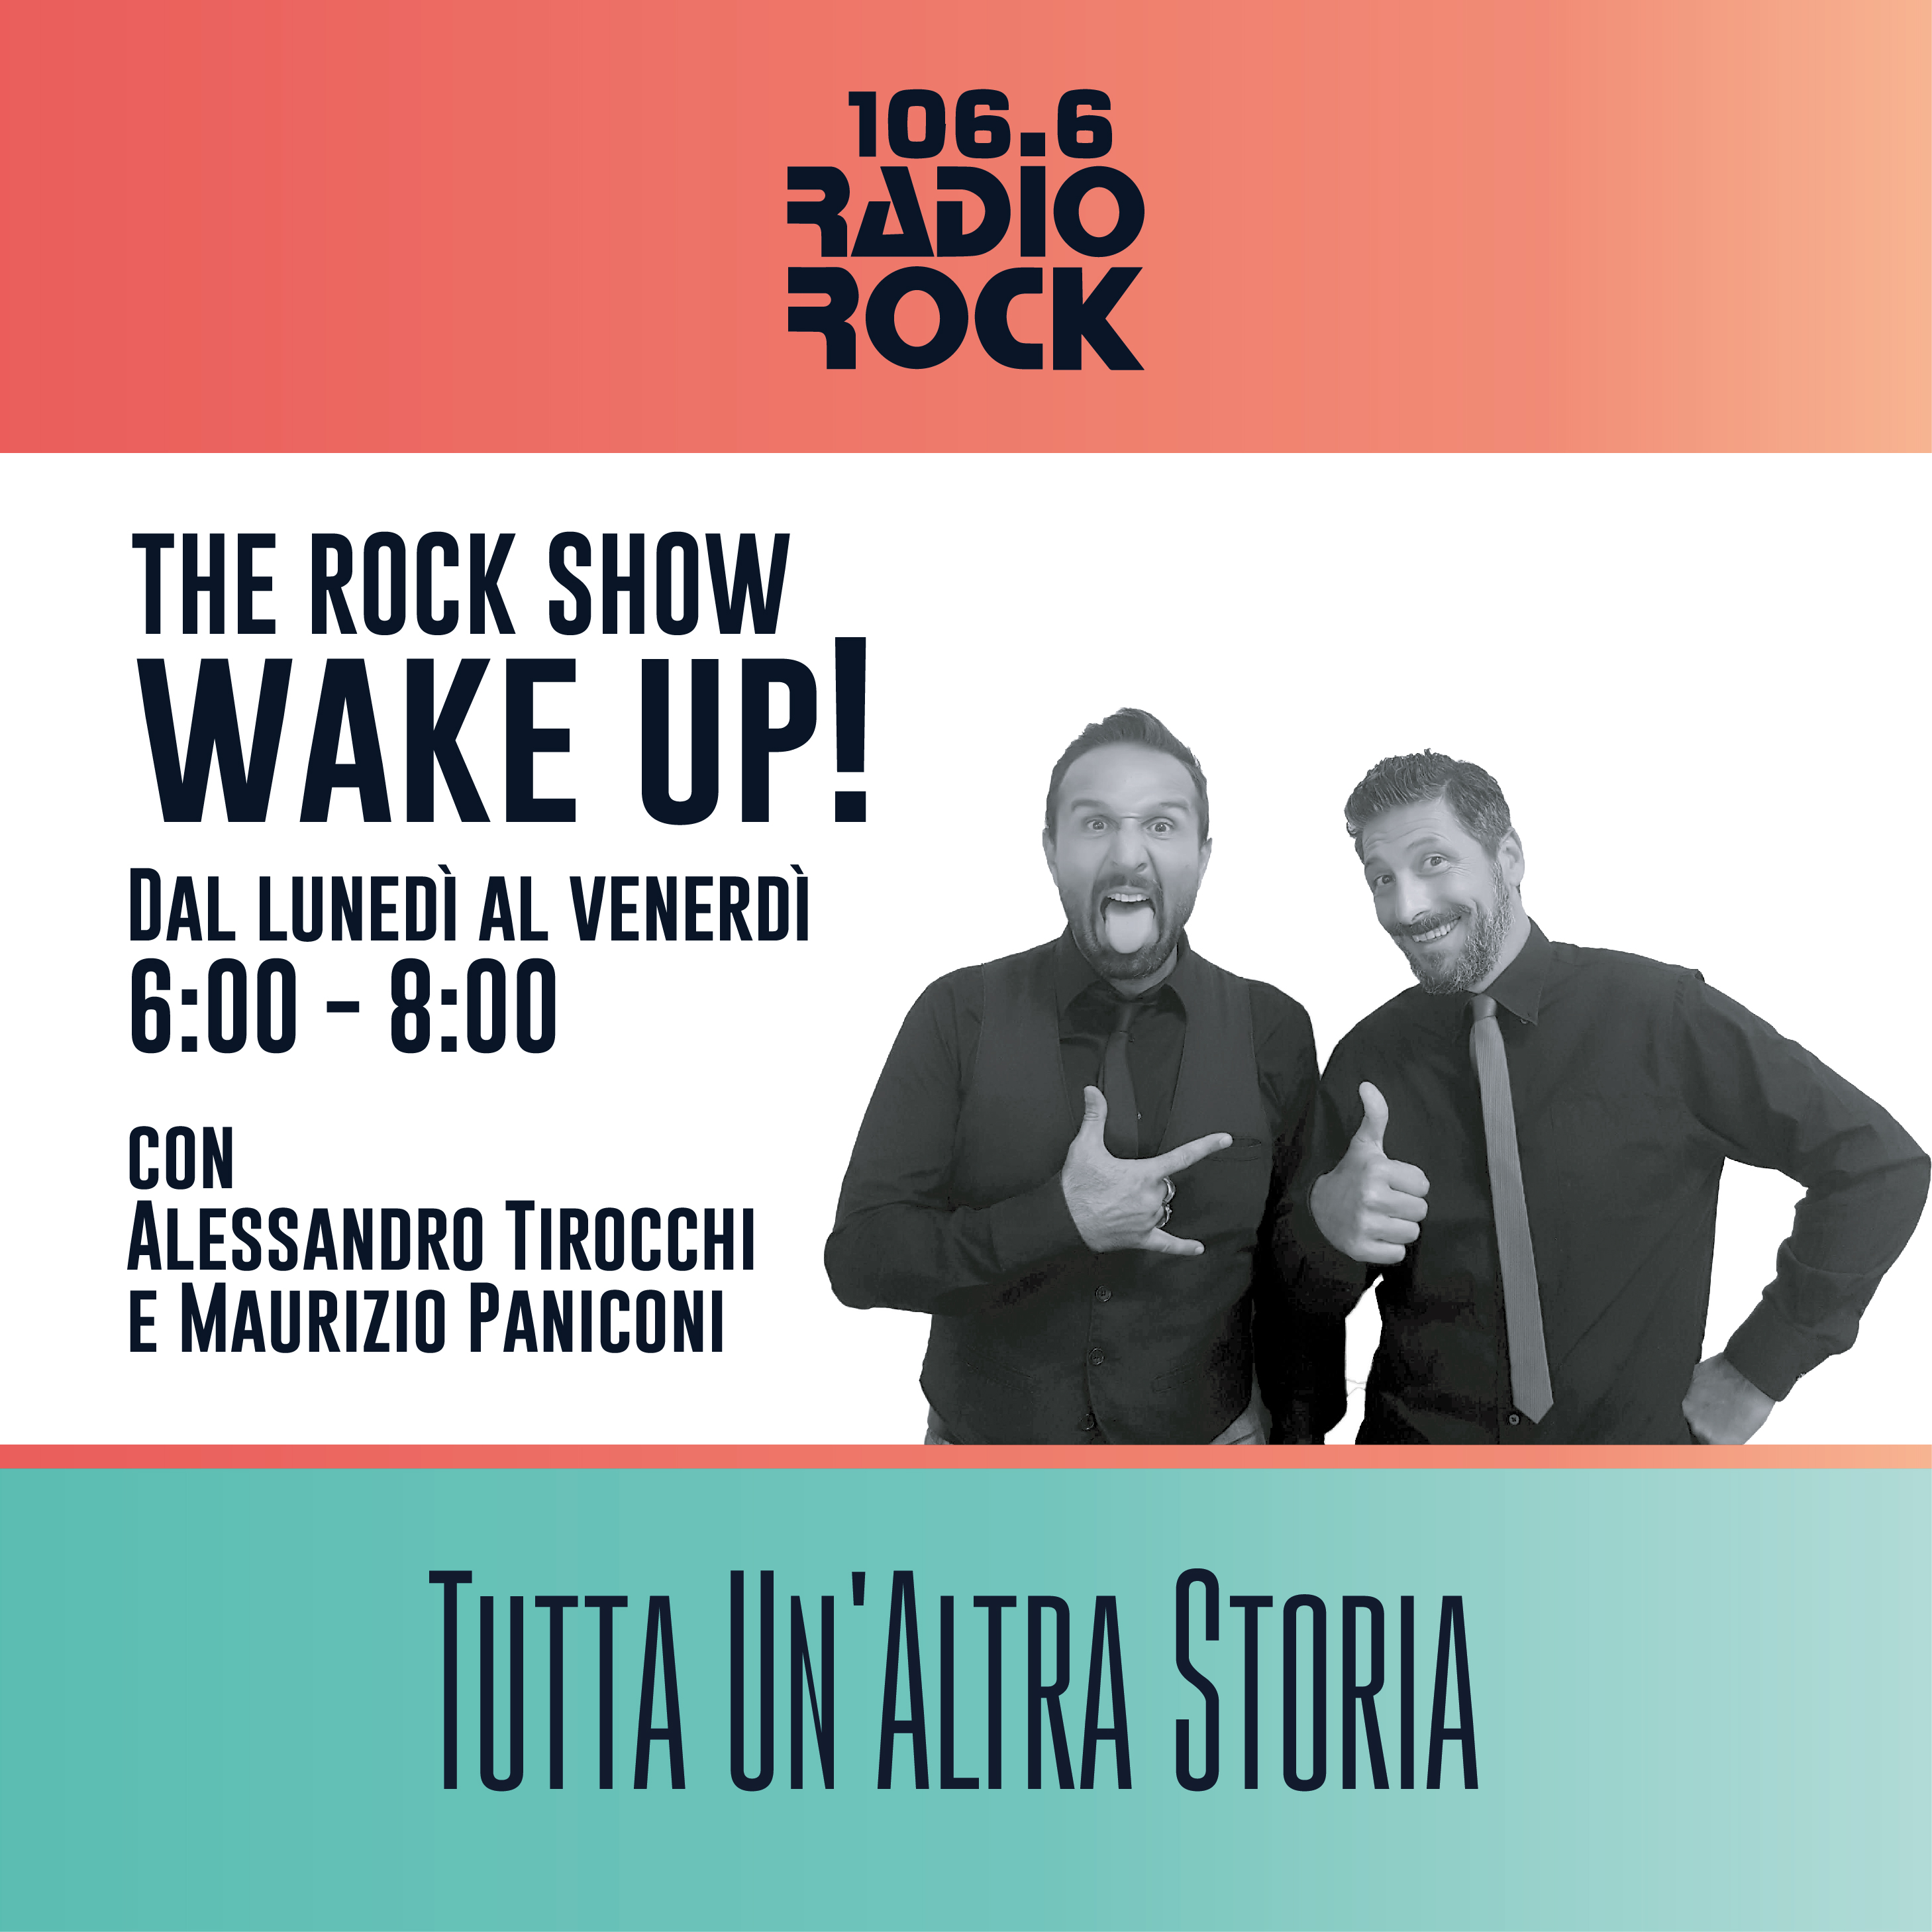 The Rock Show: Wake Up! (29-10-20)